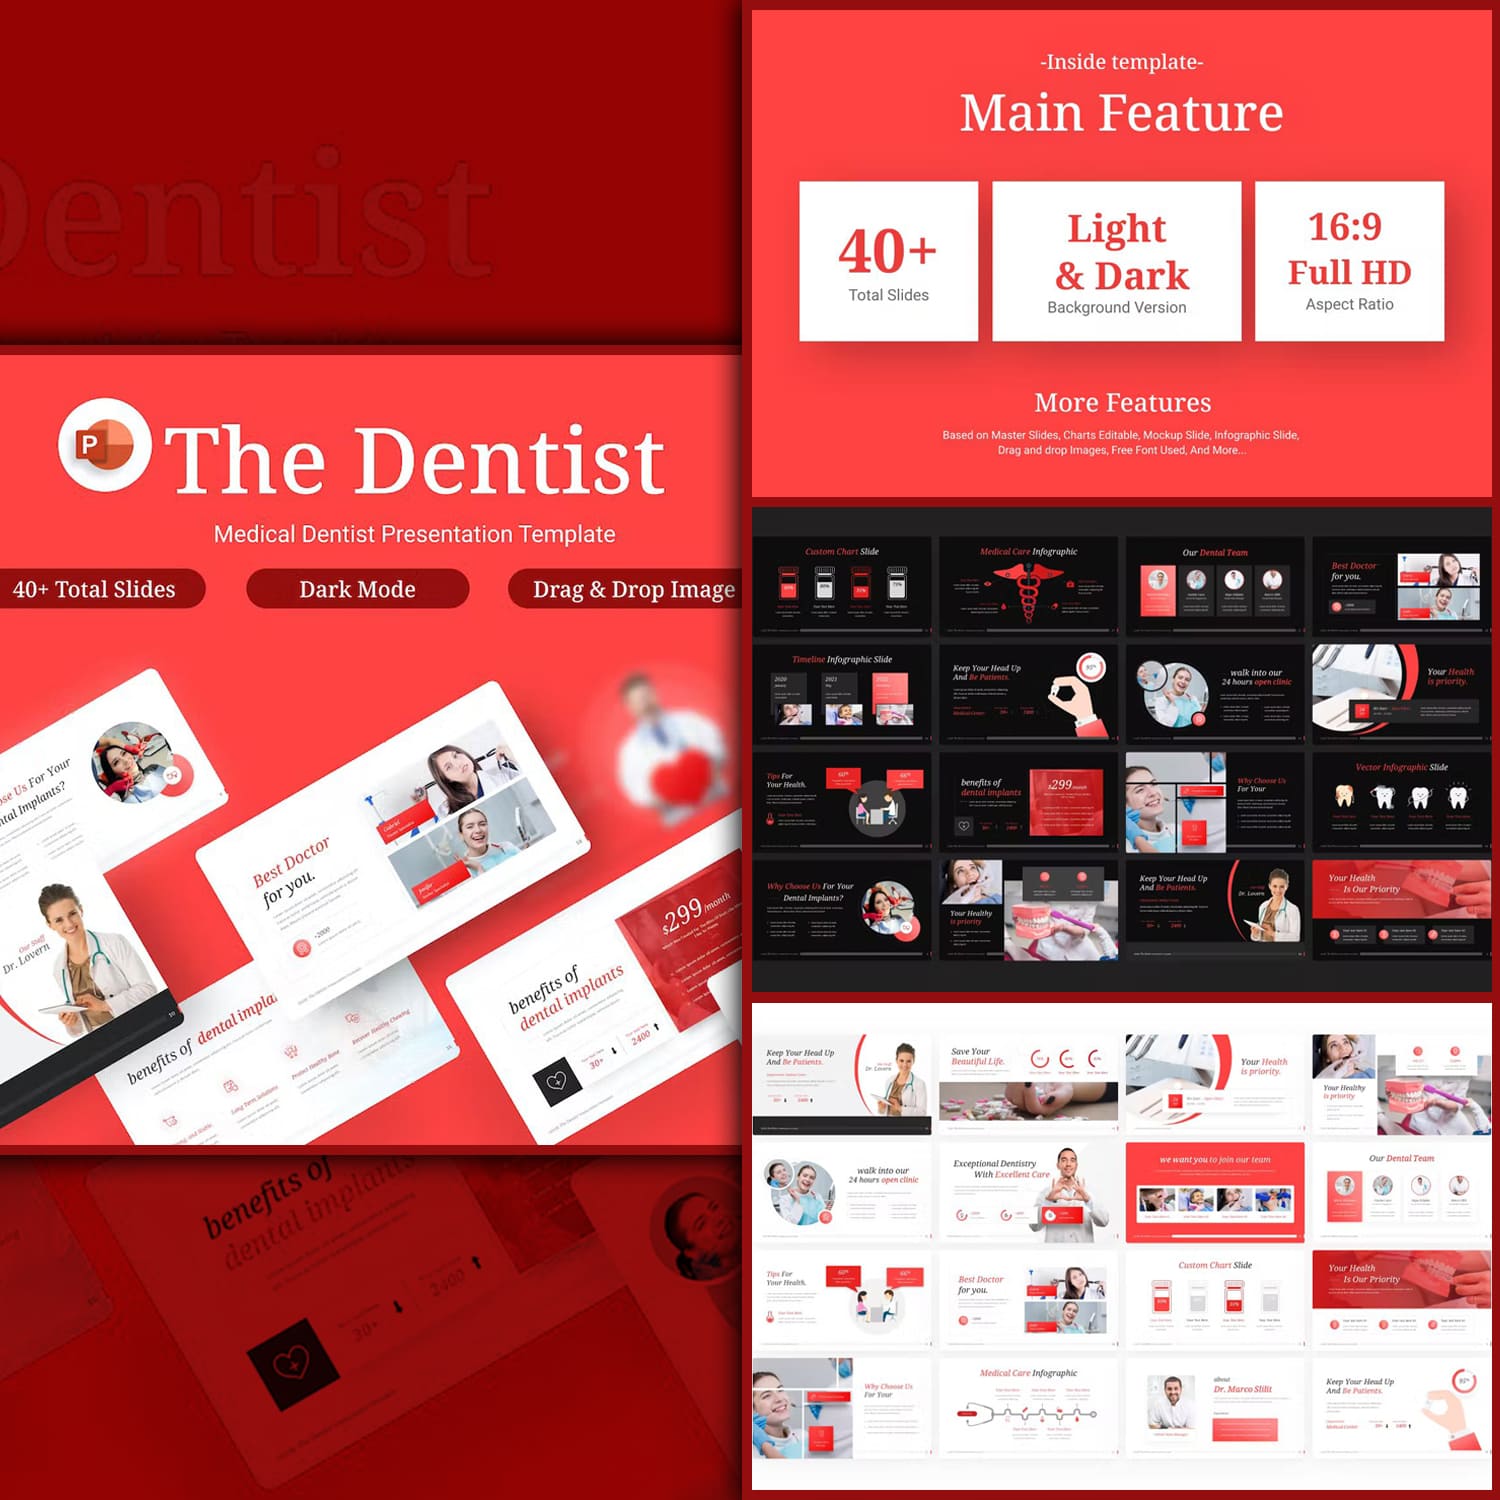 Feature Drag and Drop images on the Dentist Presentation Template.